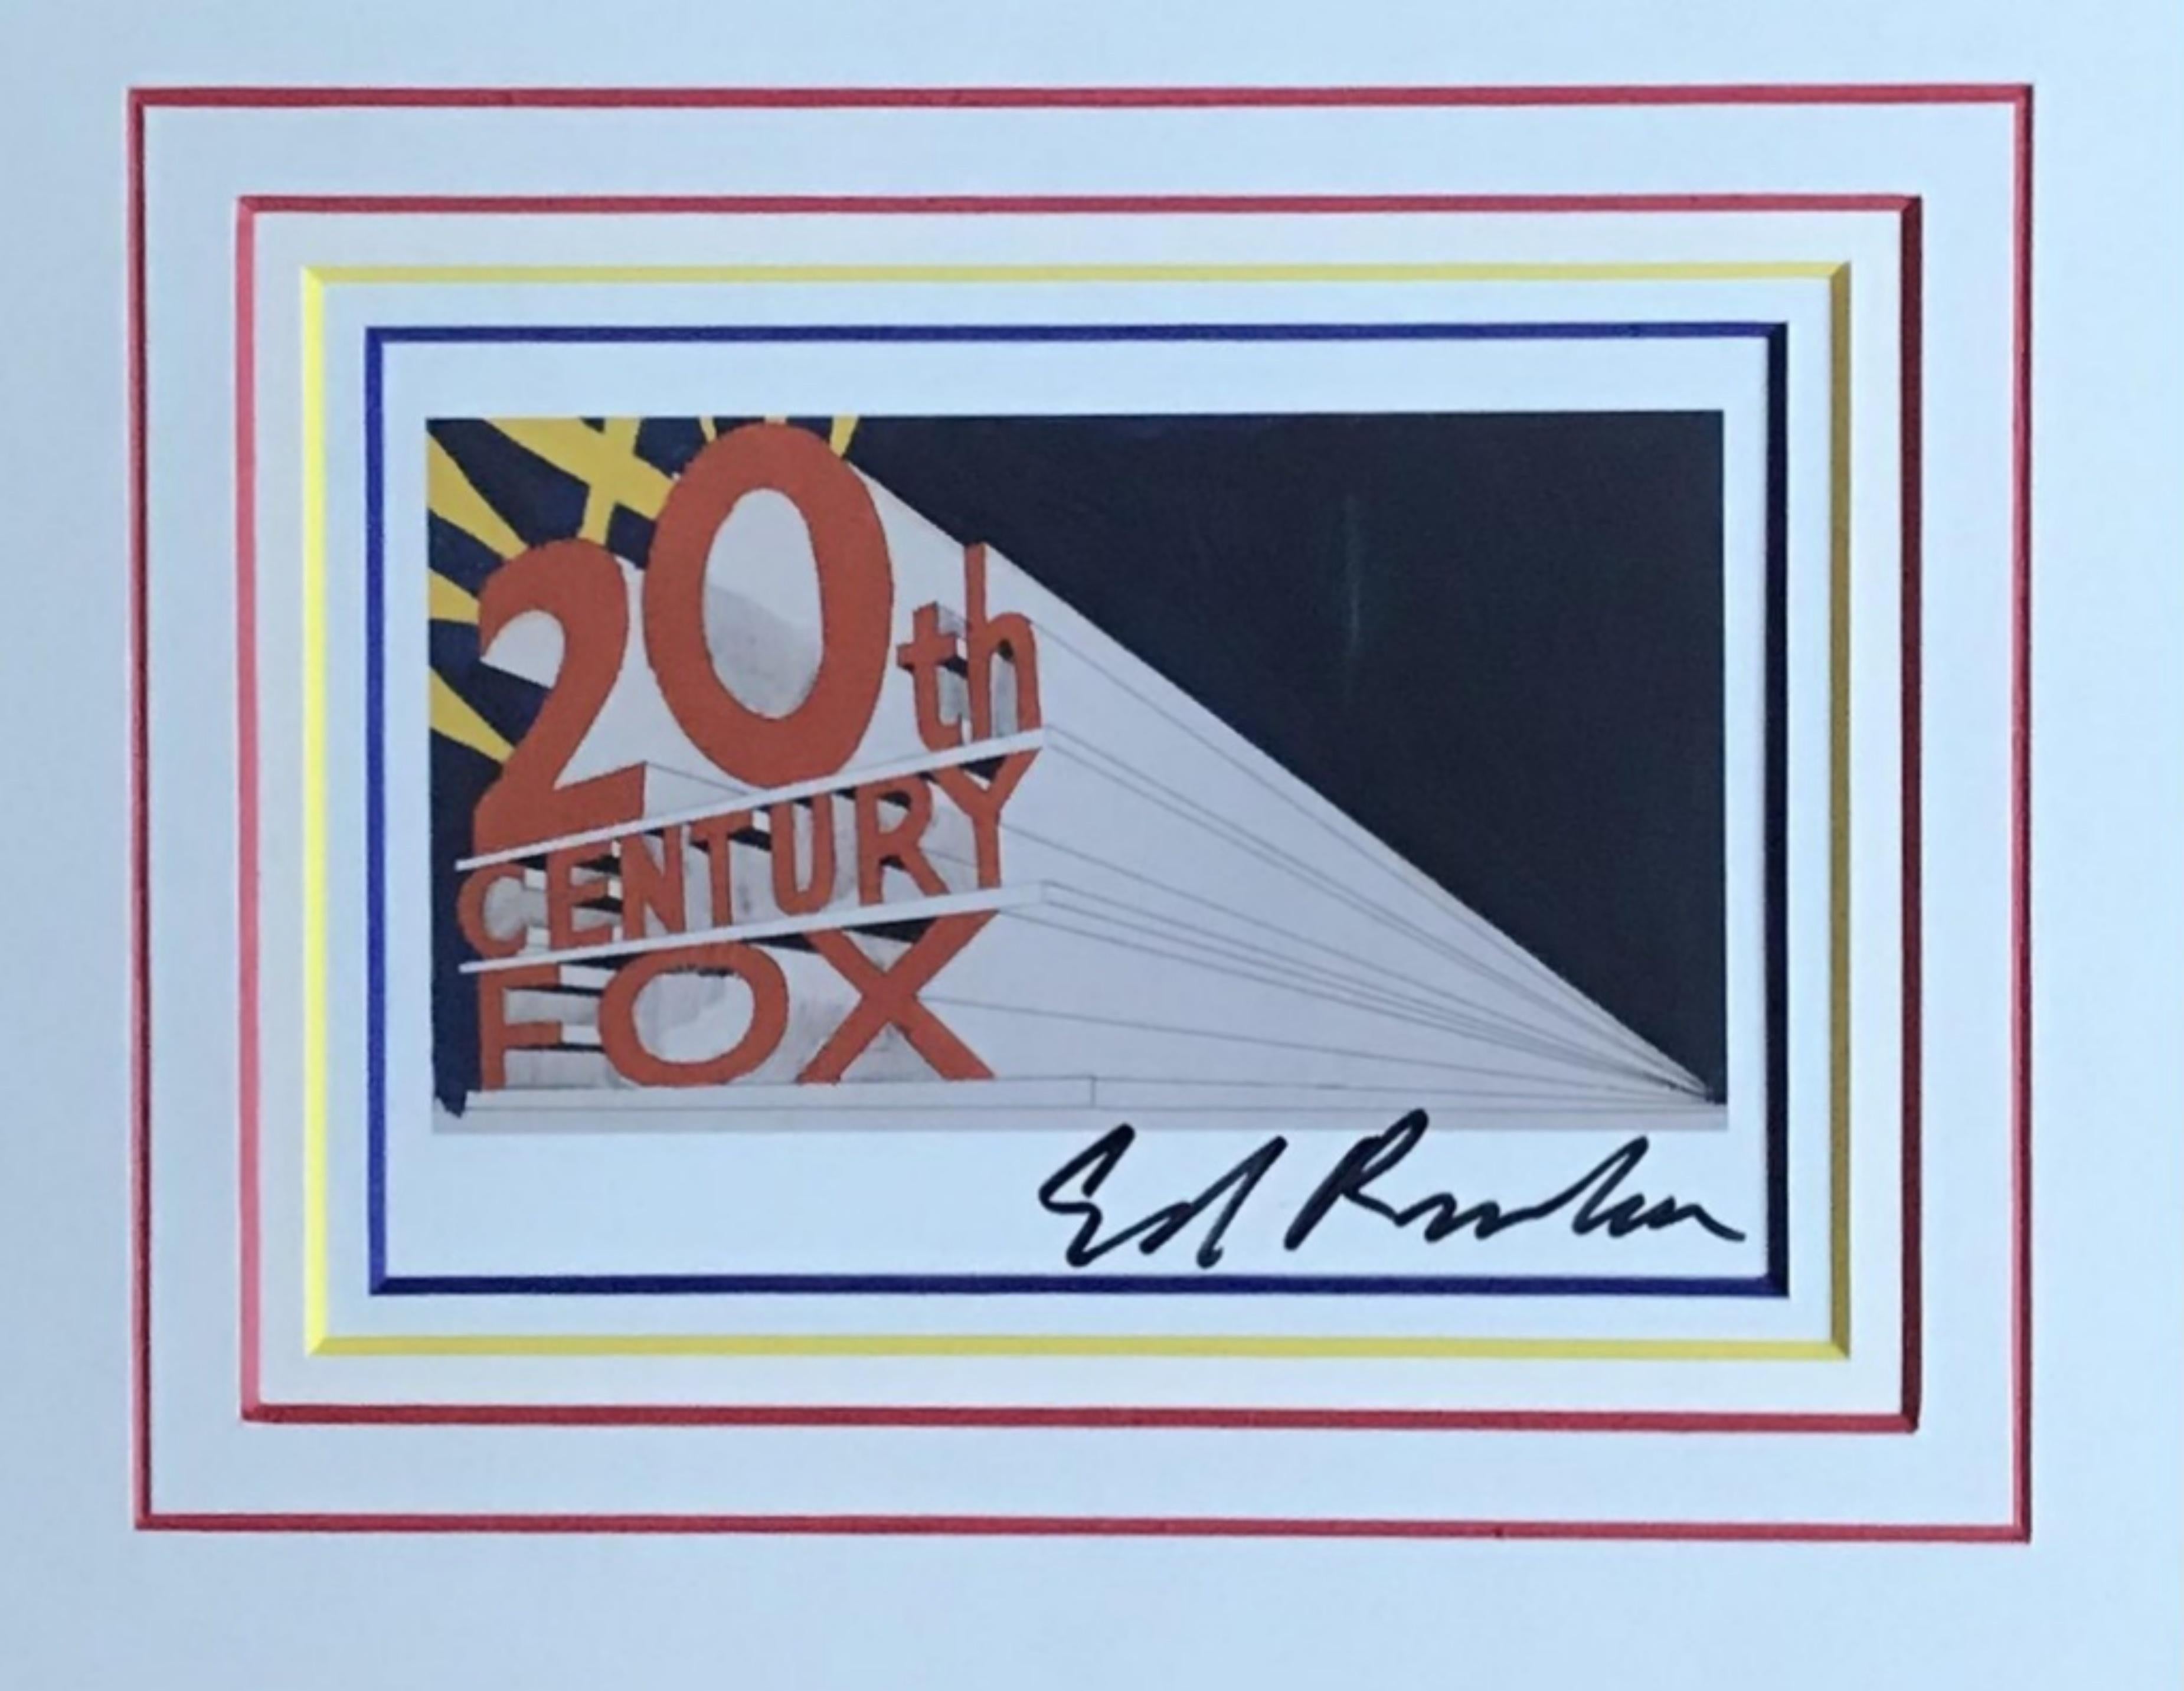 Ed Ruscha Abstract Print - 20th Century Fox (Hand Signed) offset lithograph card 